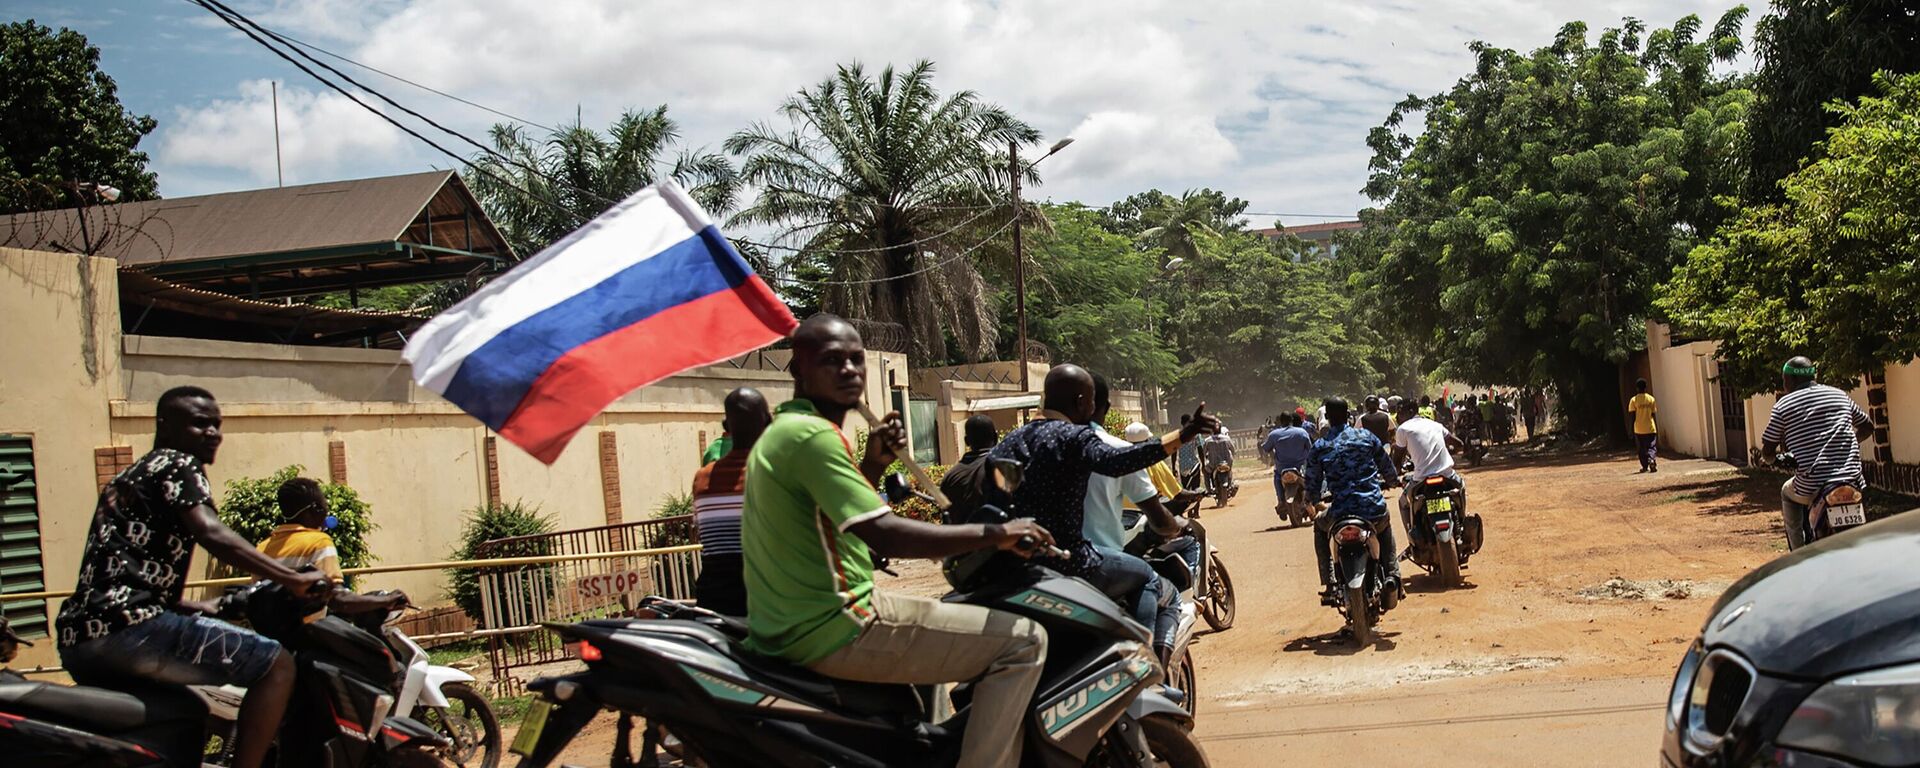 Supporters of Capt. Ibrahim Traore parade a Russian flag in the streets of Ouagadougou, Burkina Faso, Sunday, Oct. 2, 2022. Burkina Faso's new junta leadership is calling for calm after the French Embassy and other buildings were attacked. The unrest following the West African nation's second coup this year came after a junta statement alleged that the ousted interim president was at a French military base in Ouagadougou. France vehemently denied the claim and has urged its citizens to stay indoors amid rising anti-French sentiment in the streets. (AP Photo/Sophie Garcia) - Sputnik International, 1920, 25.01.2023